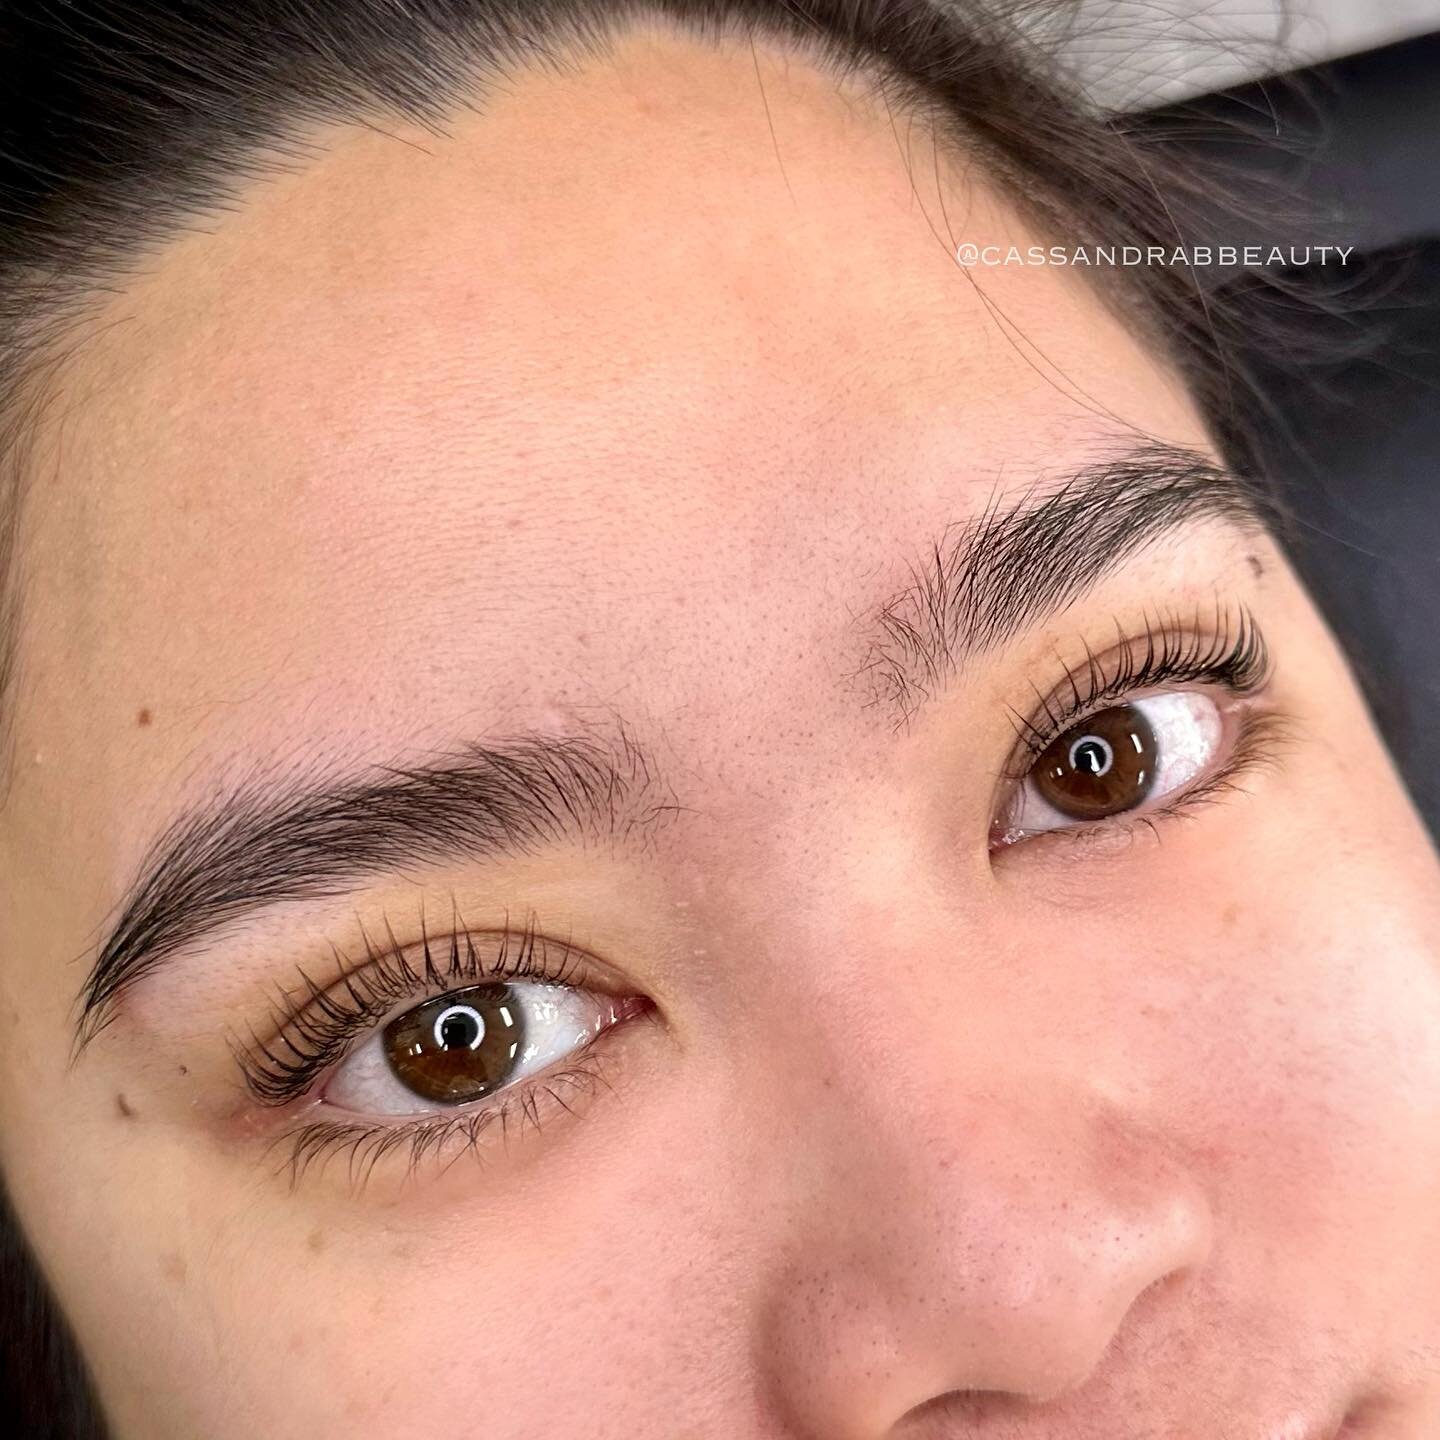 Perks of a Lash LIFT 🖤
👉🏼 Low maintenance: lasts up to 6-8 weeks
👉🏼 Rub your eyes all you want!
👉🏼 No limitations on skincare/makeup (oils, products, mascara, strip lashes etc)
👉🏼 Quick service - 30-40 mins
👉🏼 Wide-awake, lifted appearance